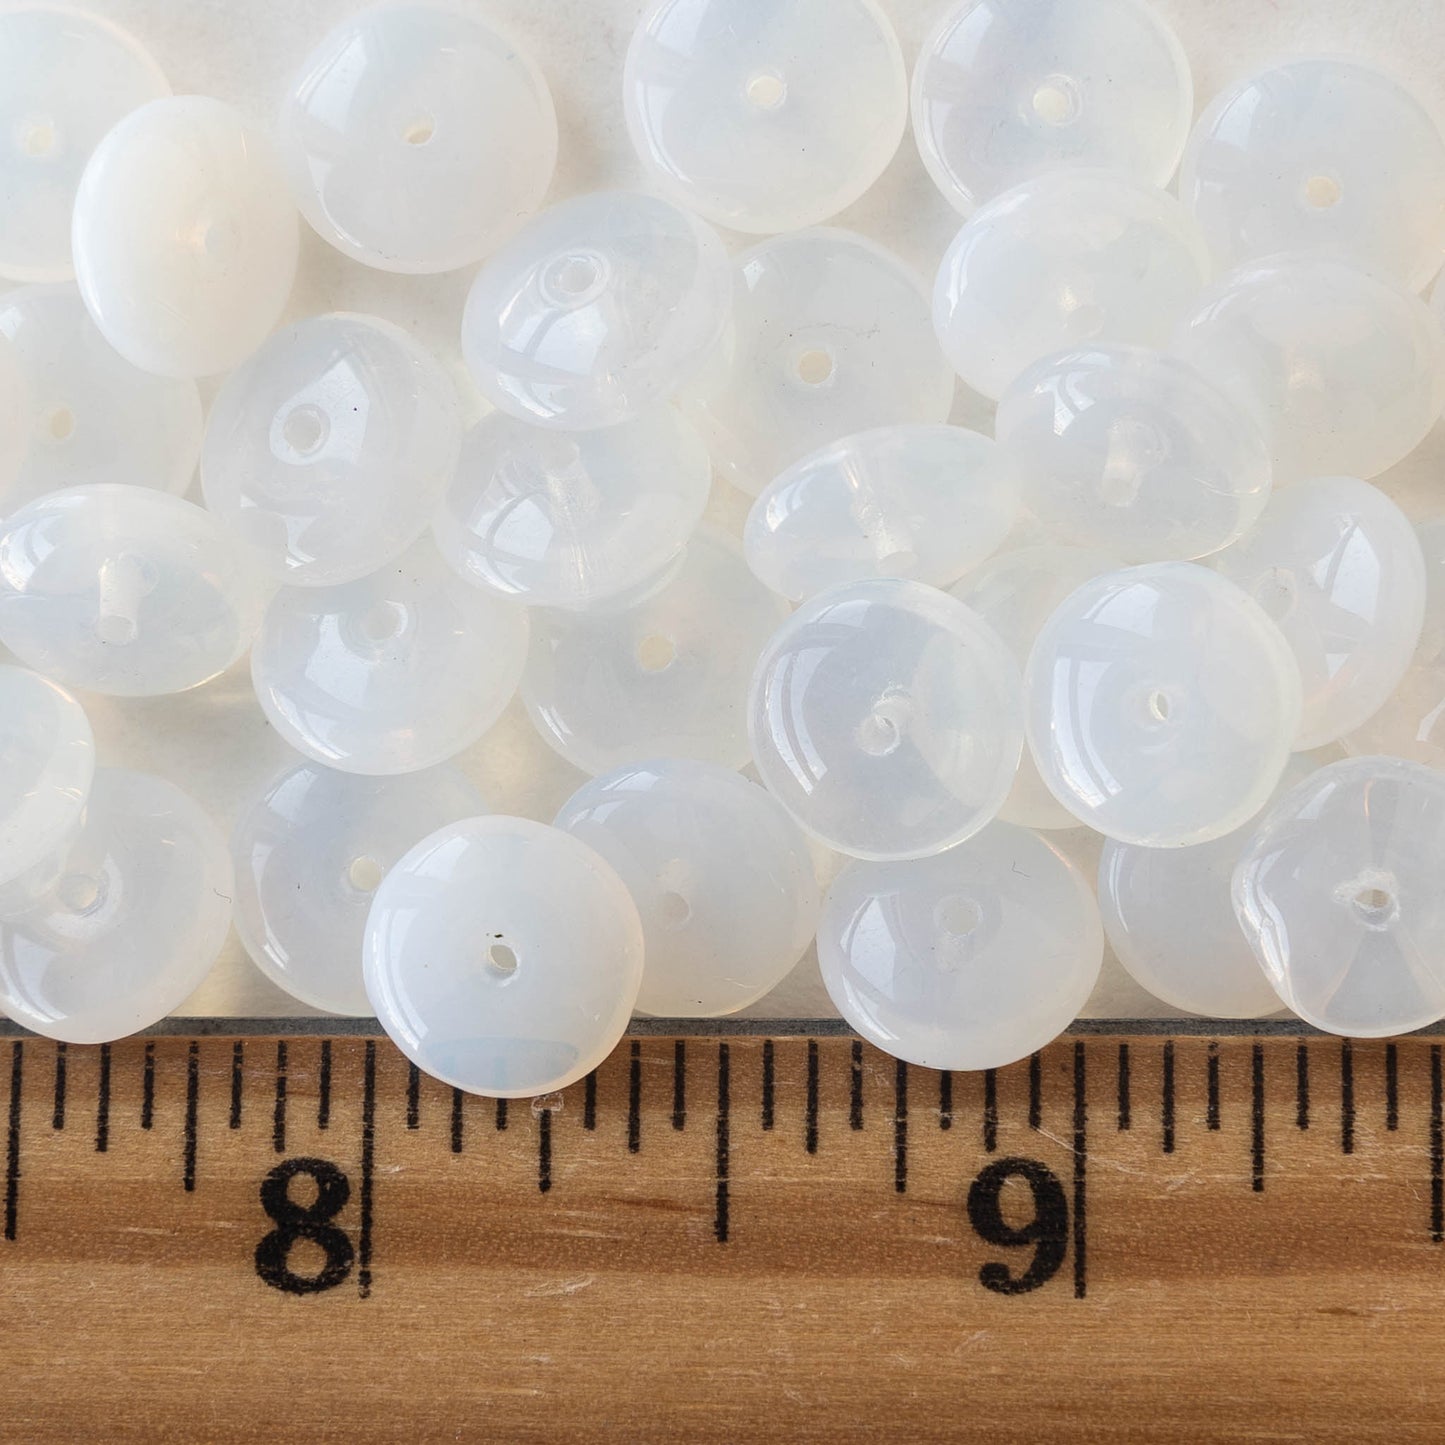 10mm Glass Rondelle Beads - Angel White Opaline - 30 Beads